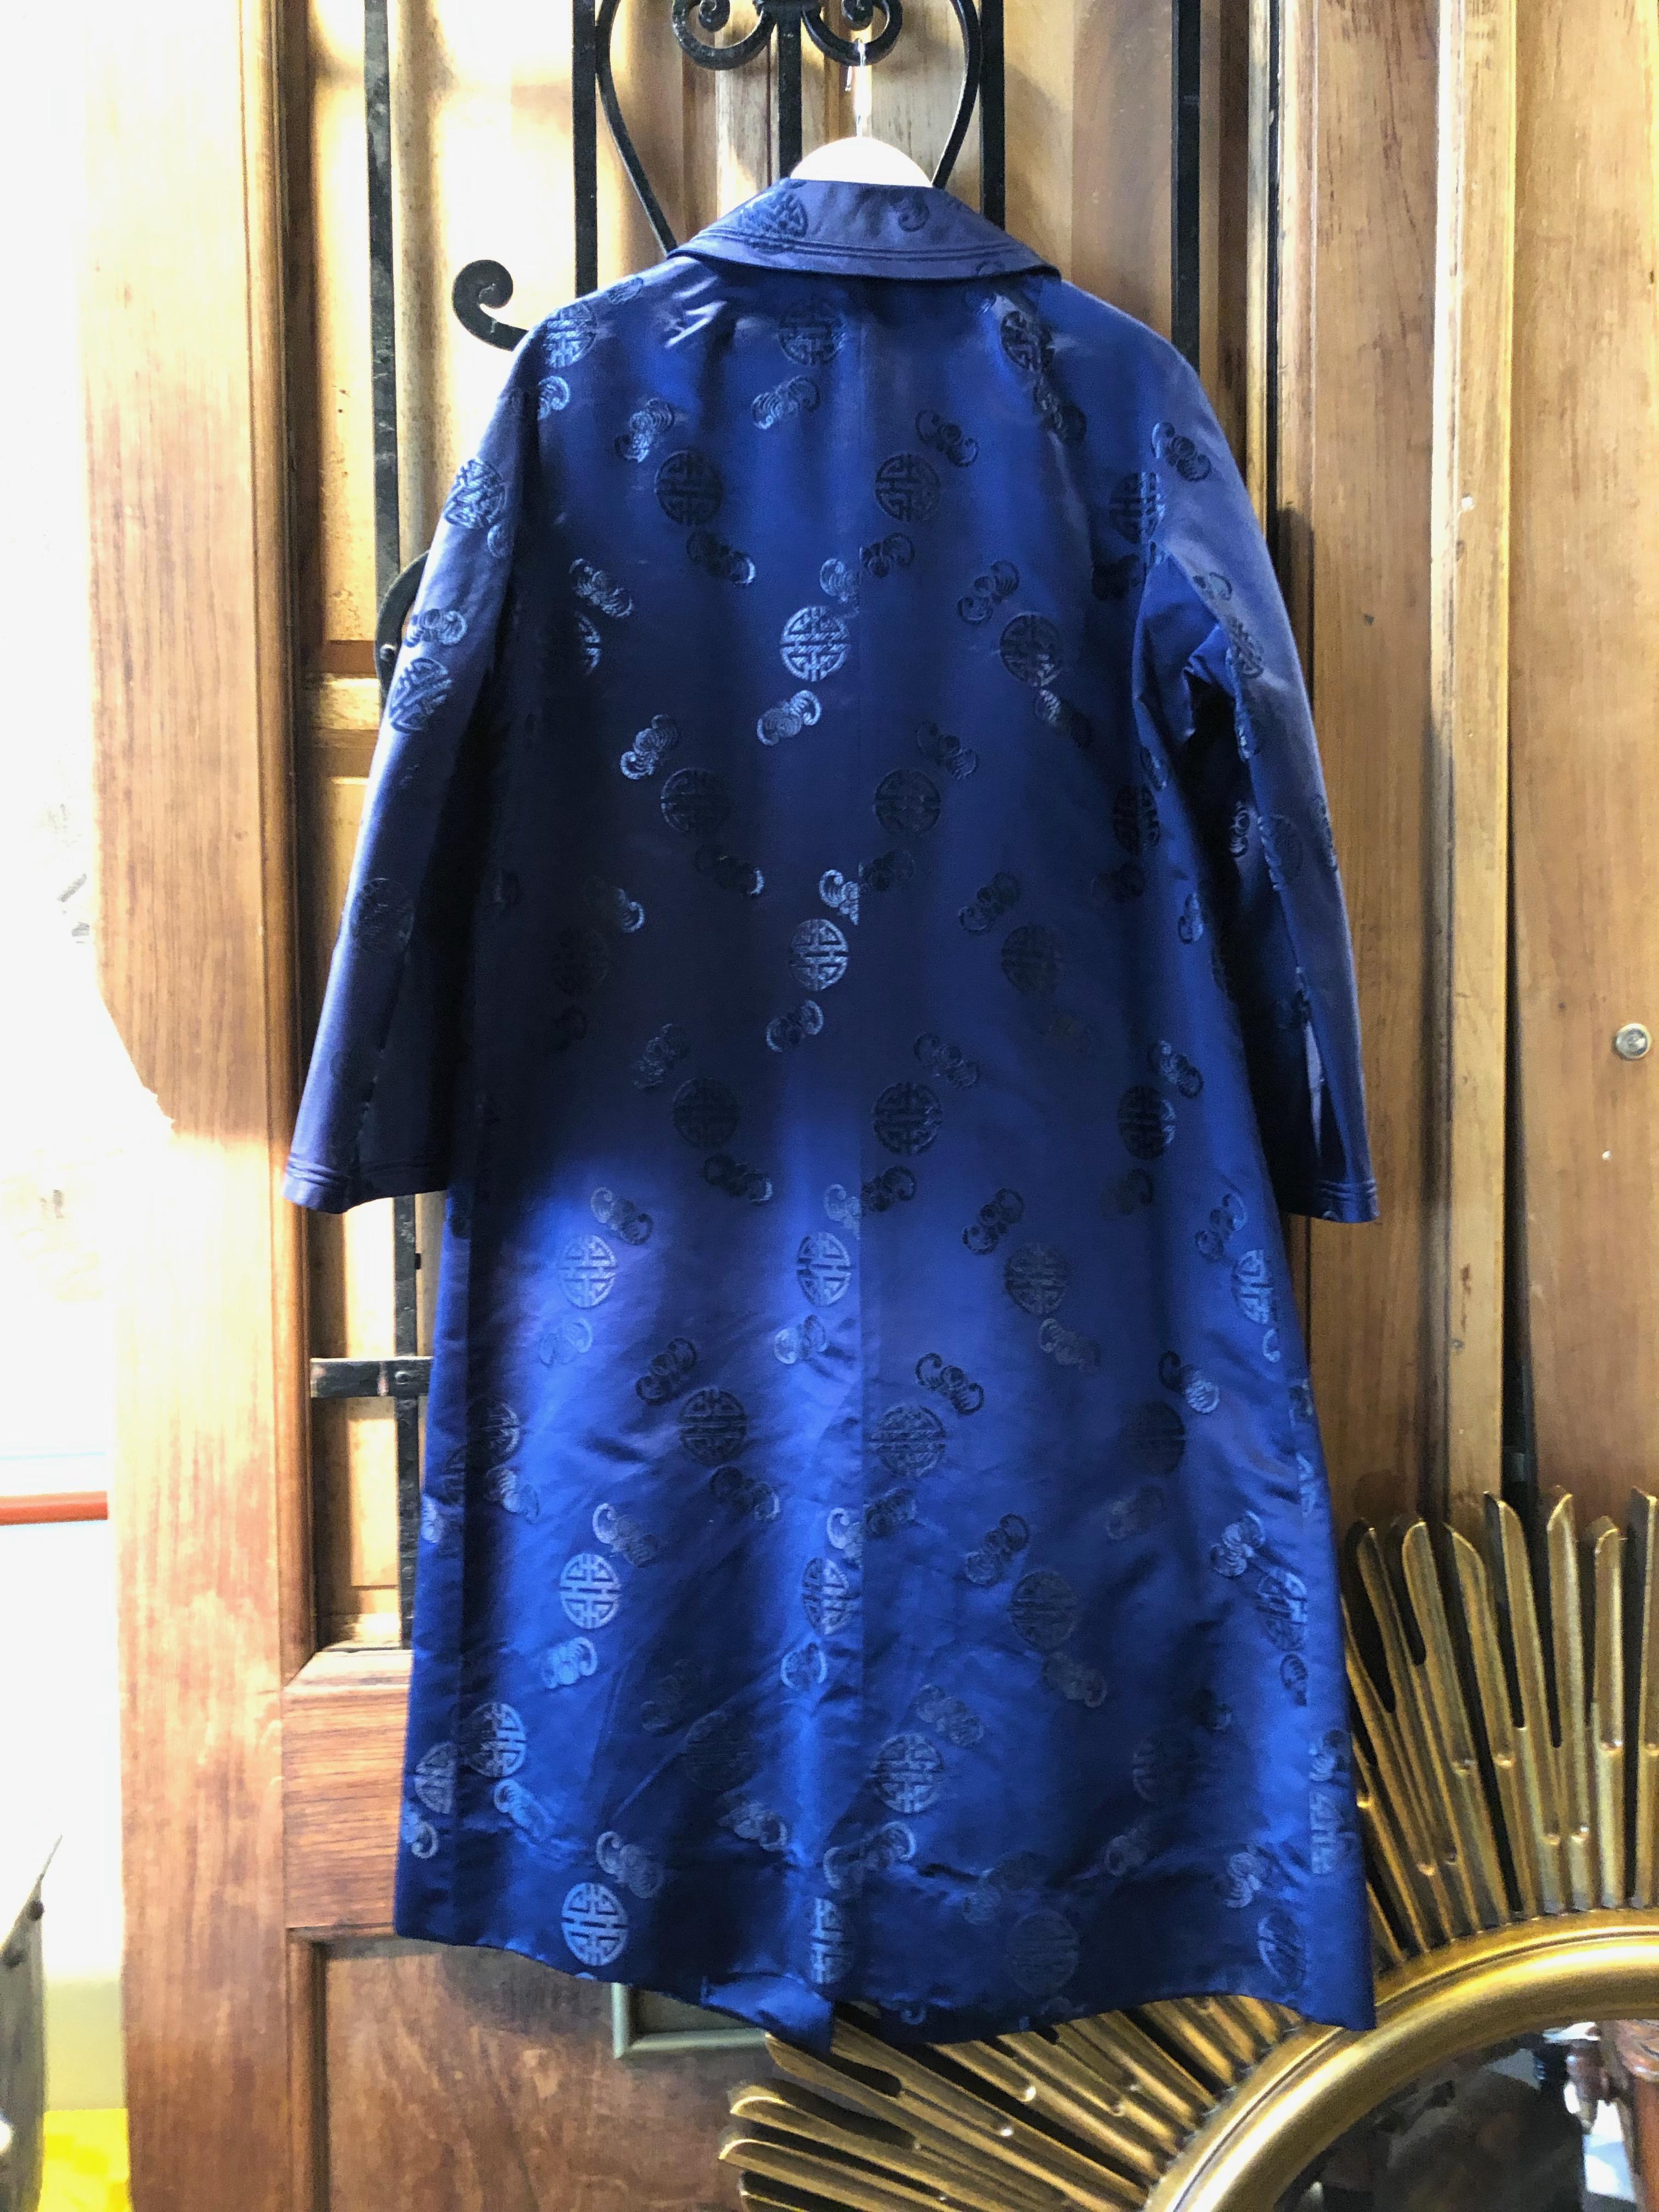 This handmade Chinese silk coat is vintage in wonderful condition. Beautiful blue no stains no wear. Beautiful embroidery!
Size 12-14 below the knee.